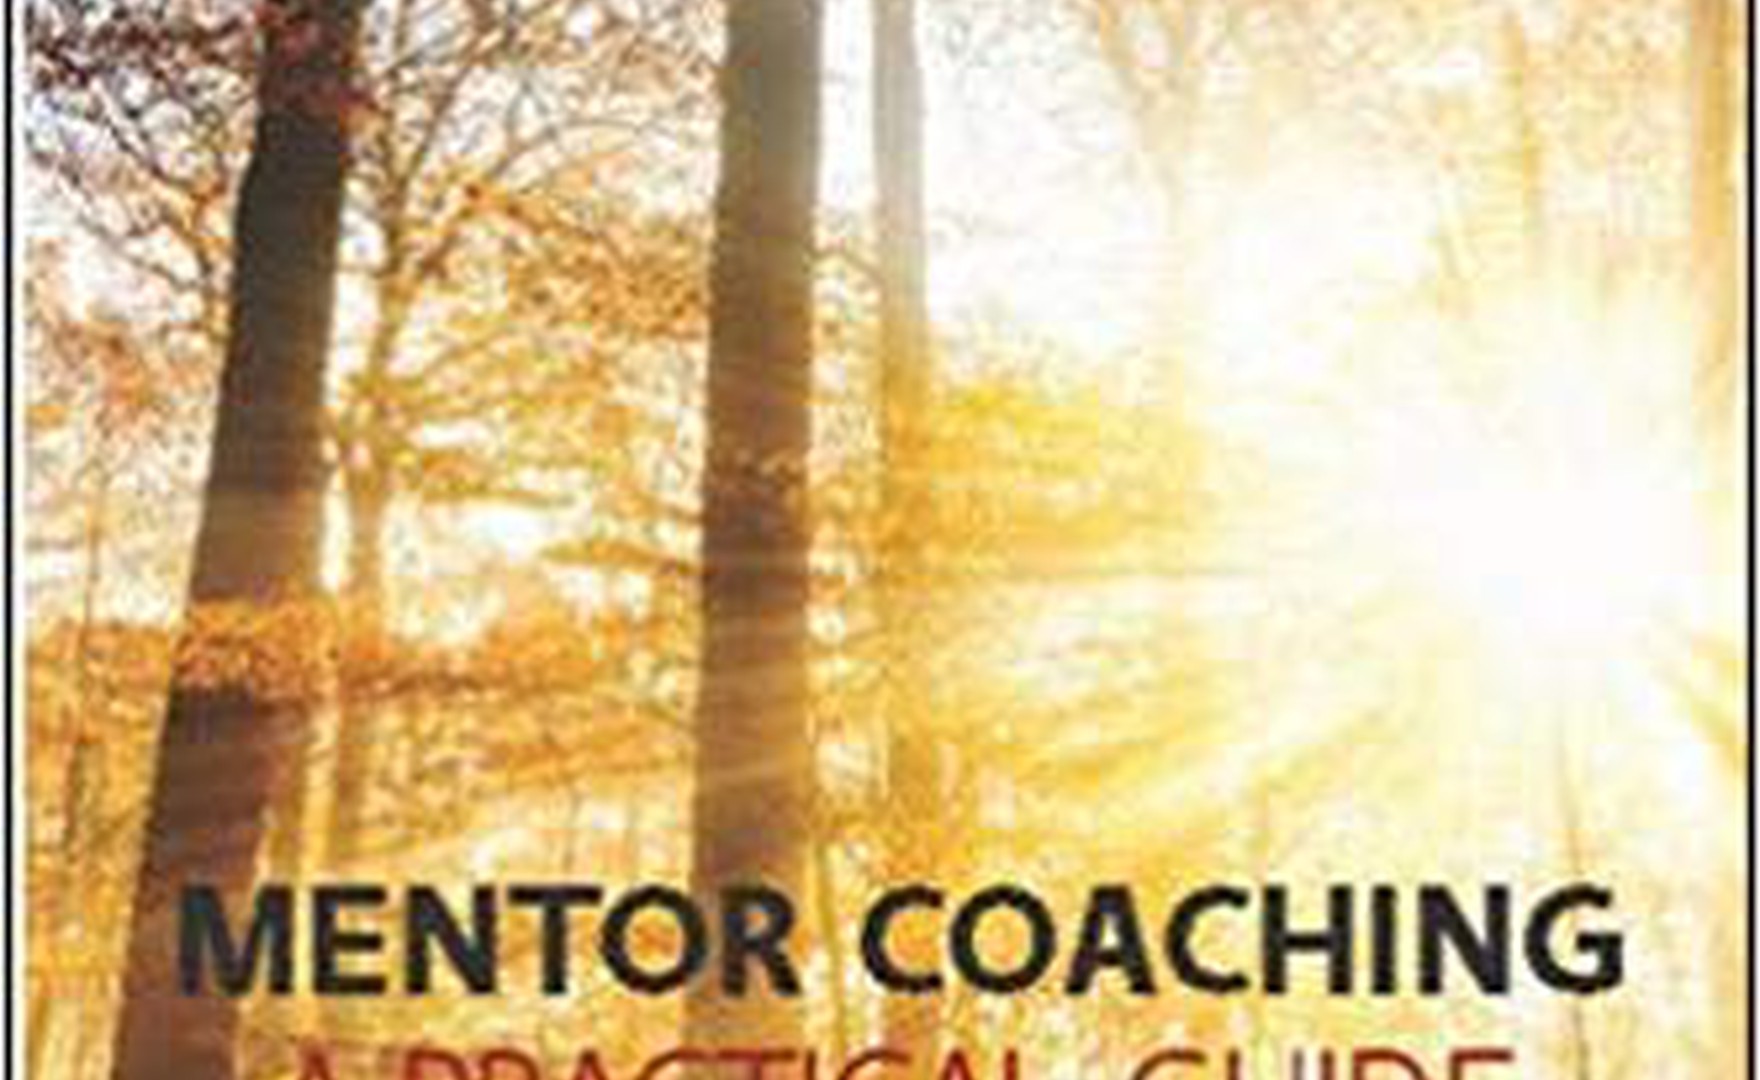 Mentor Coaching by Clare Norman